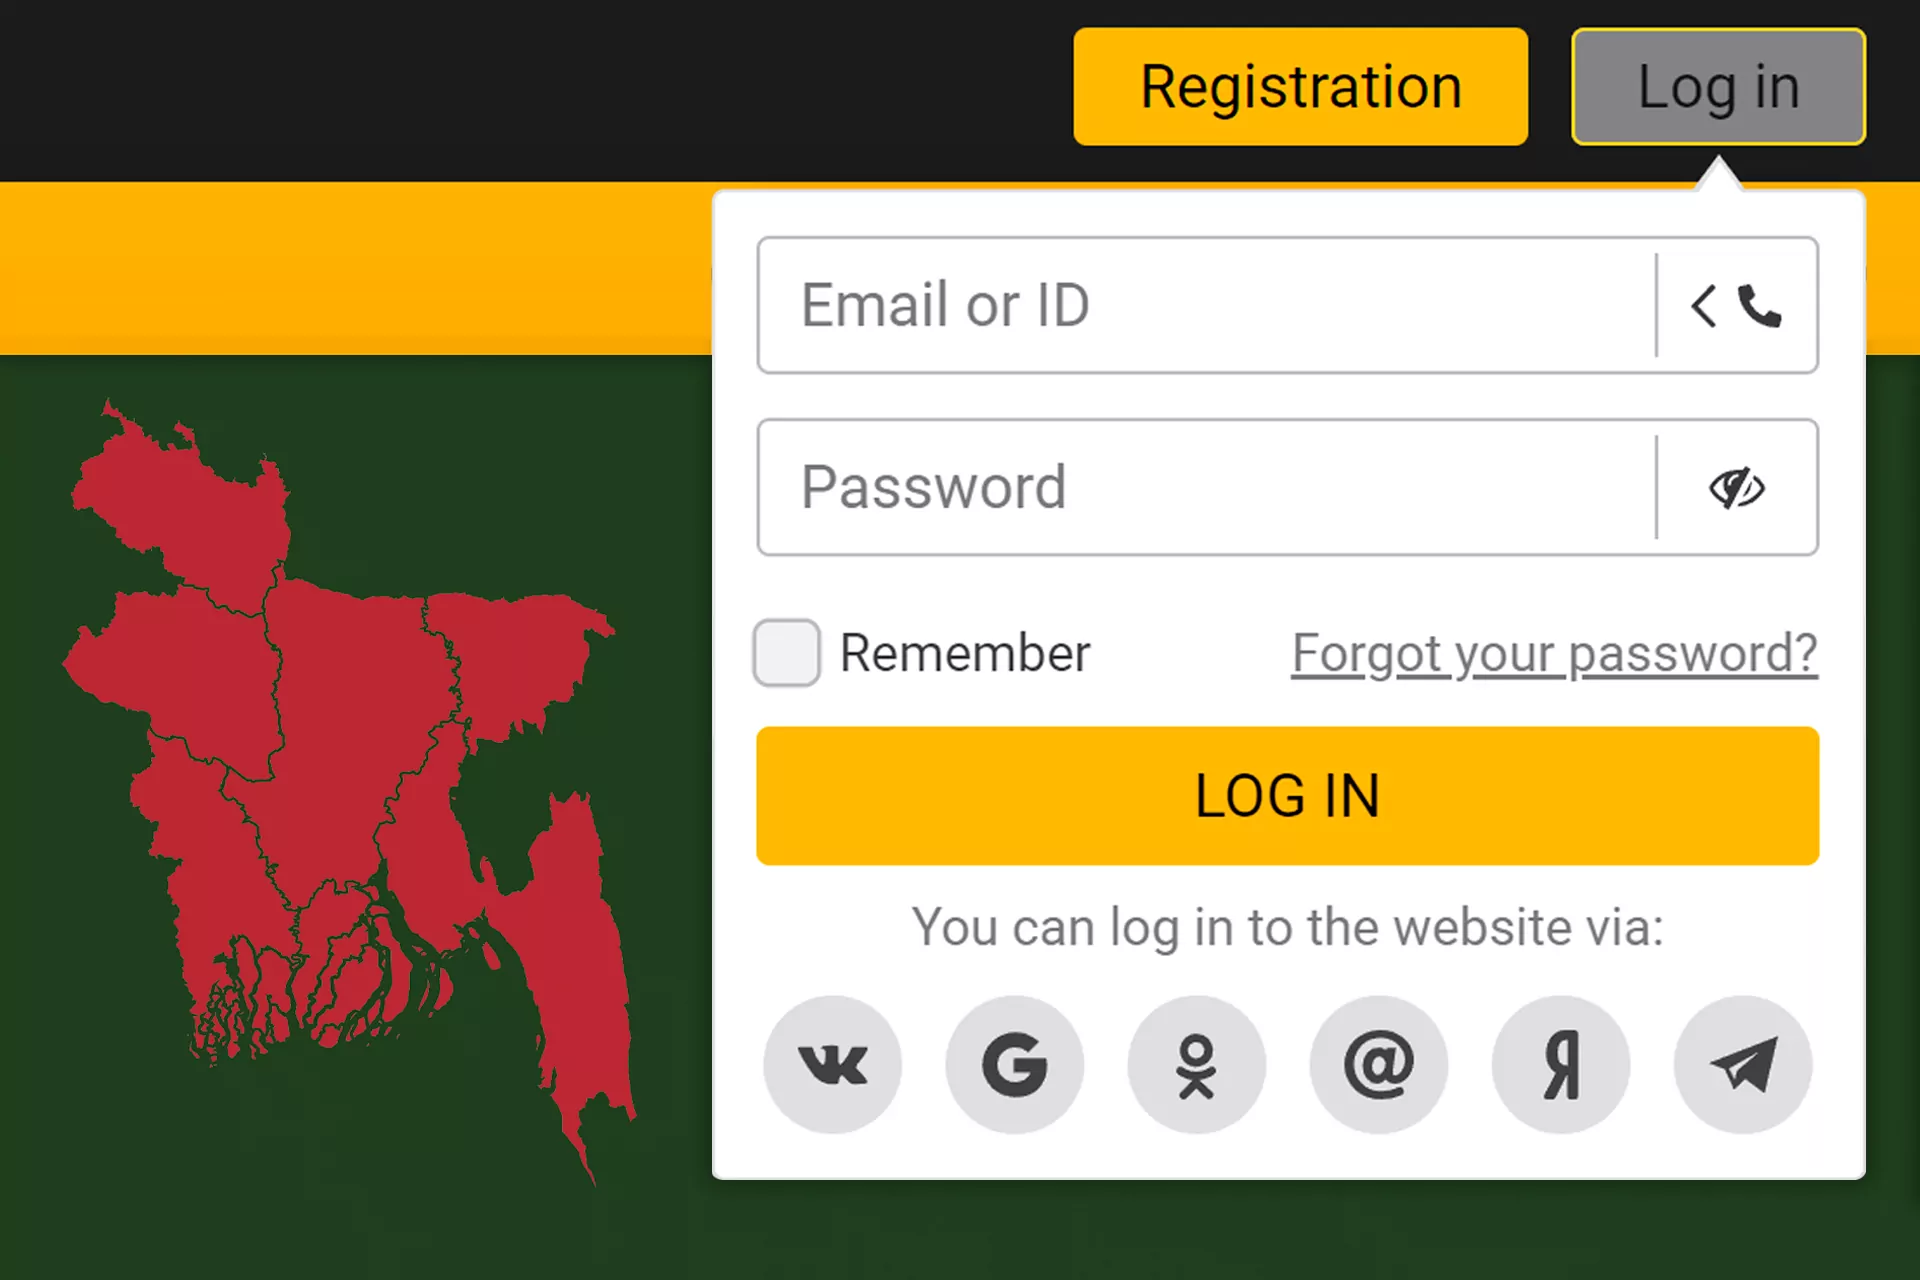 Enter your ID and password to log in from Bangladesh.